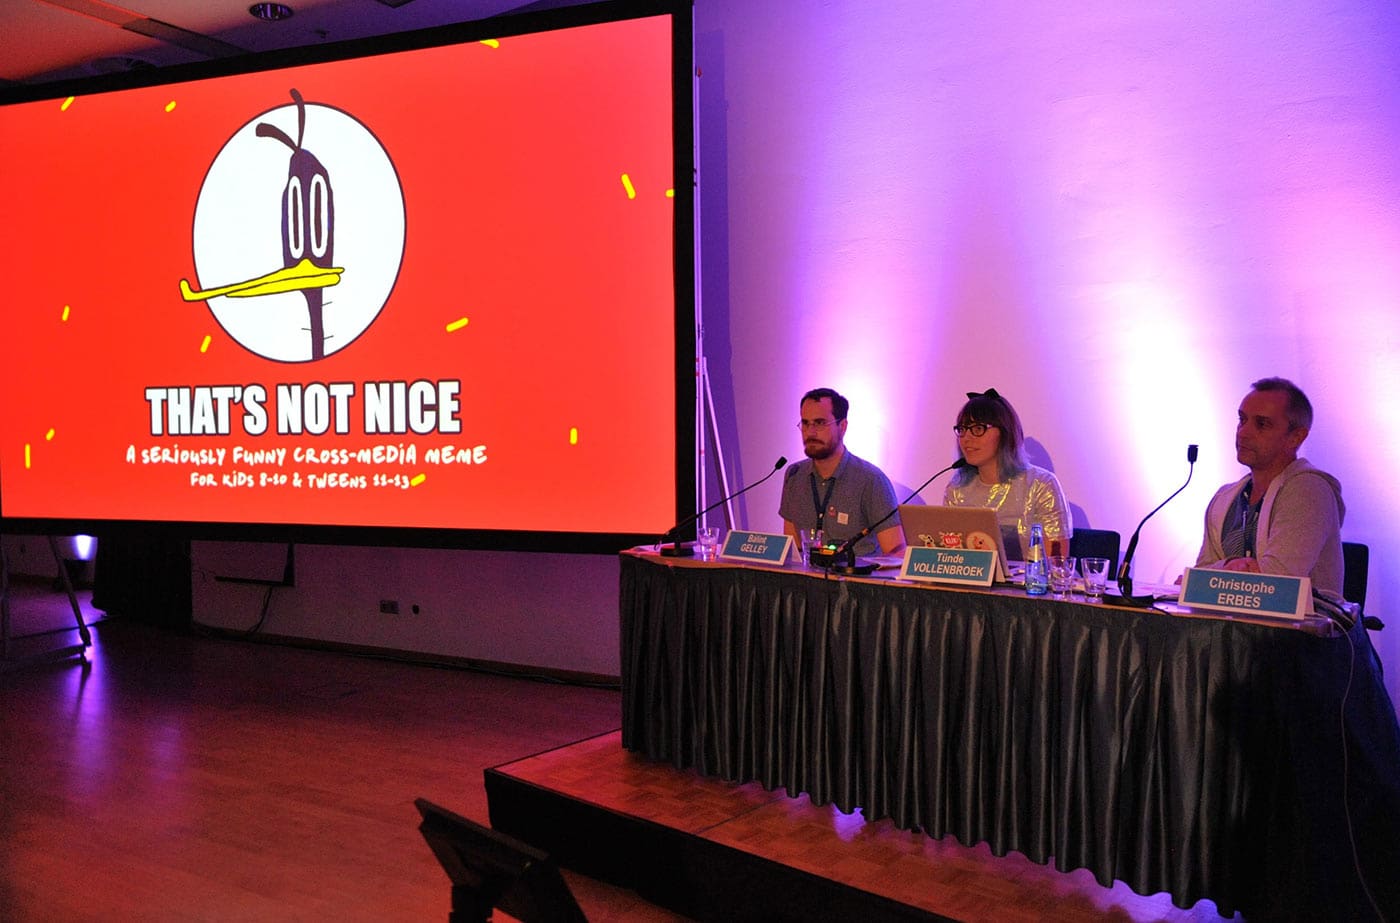 Pitching my cross-media micro-short project "That's Not Nice" created with Bálint Gelley.